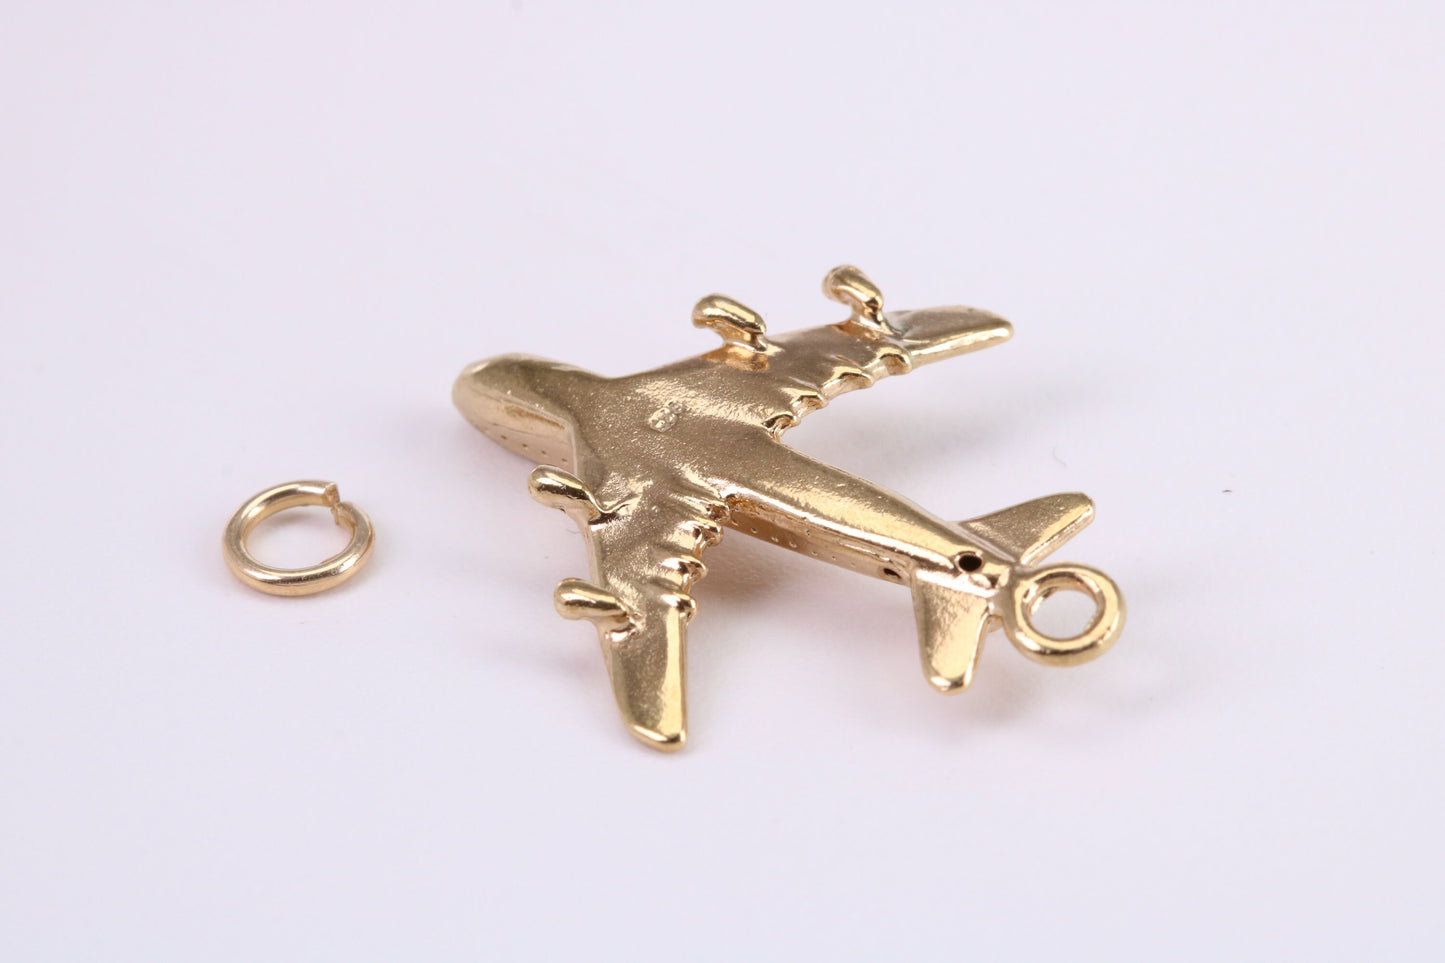 Jumbo Jet 747 Charm, Traditional Charm, Made from Solid Yellow Gold, British Hallmarked, Complete with Attachment Link